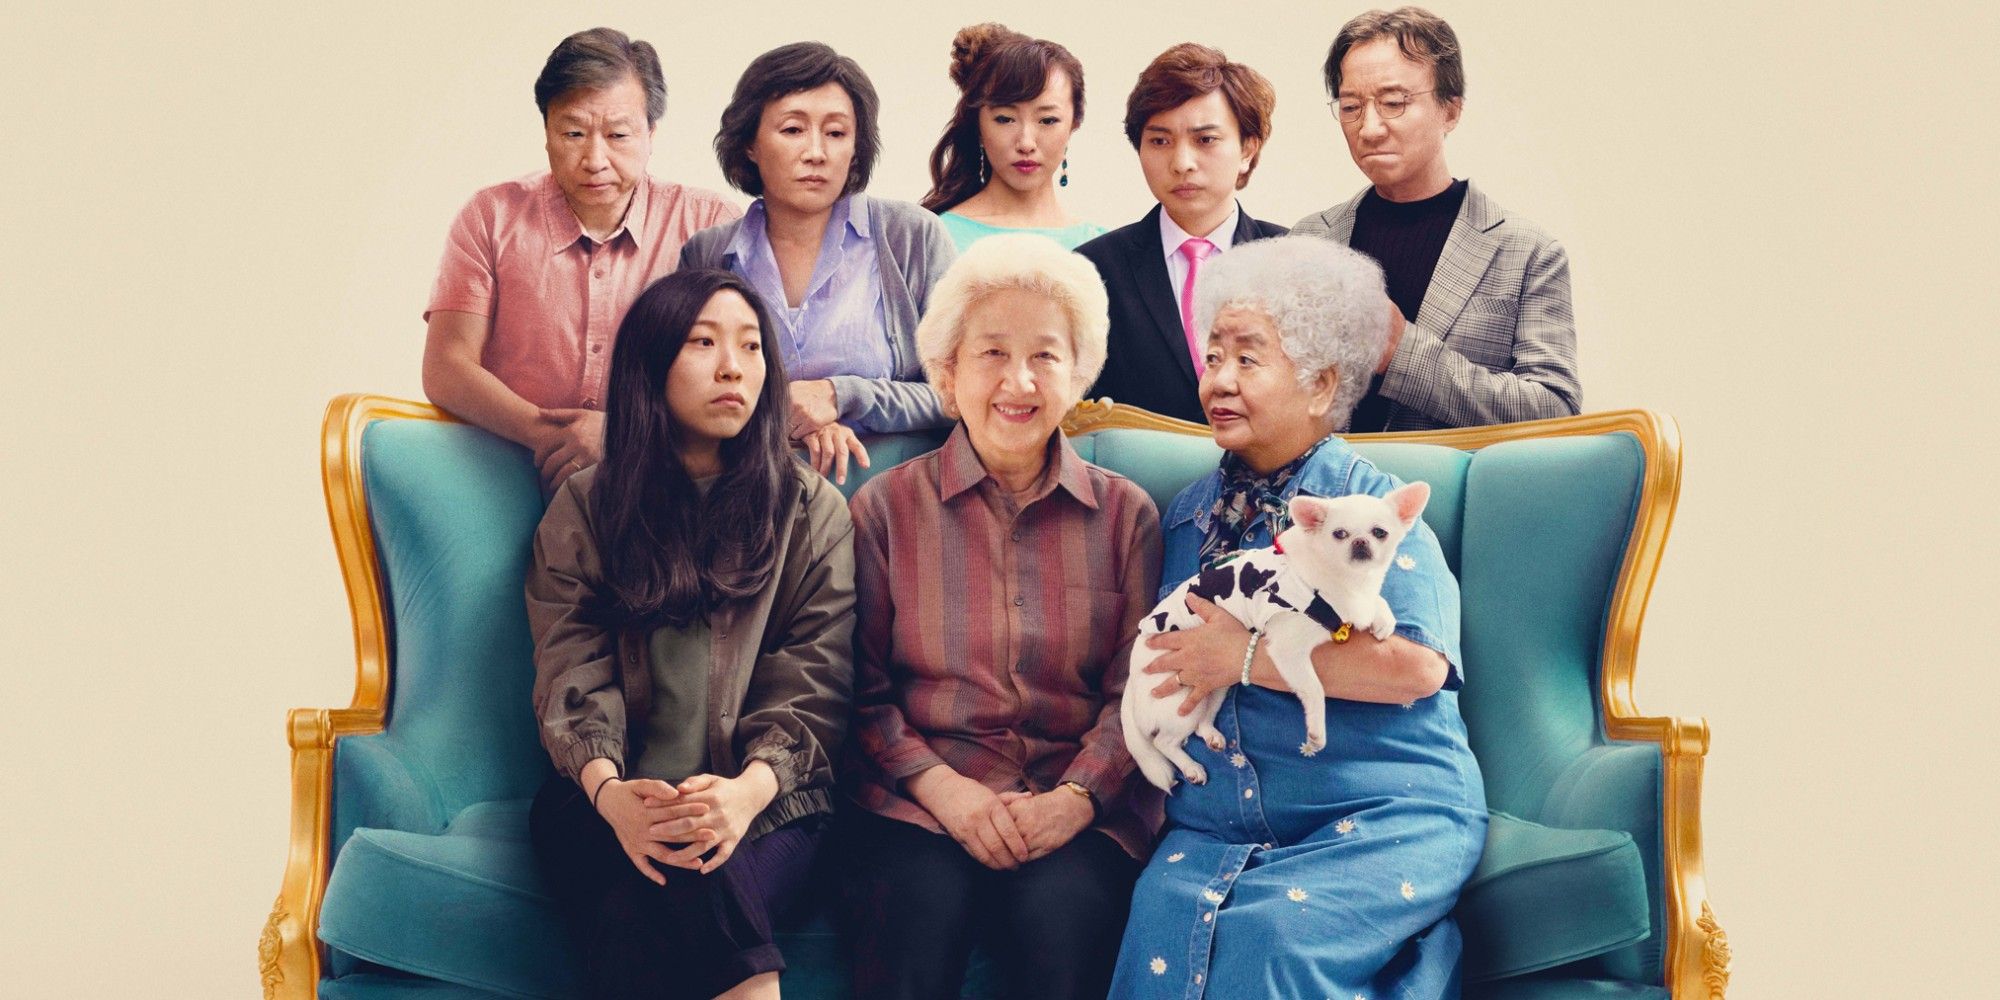 A promo image featuring the cast of The Farewell sitting on a couch